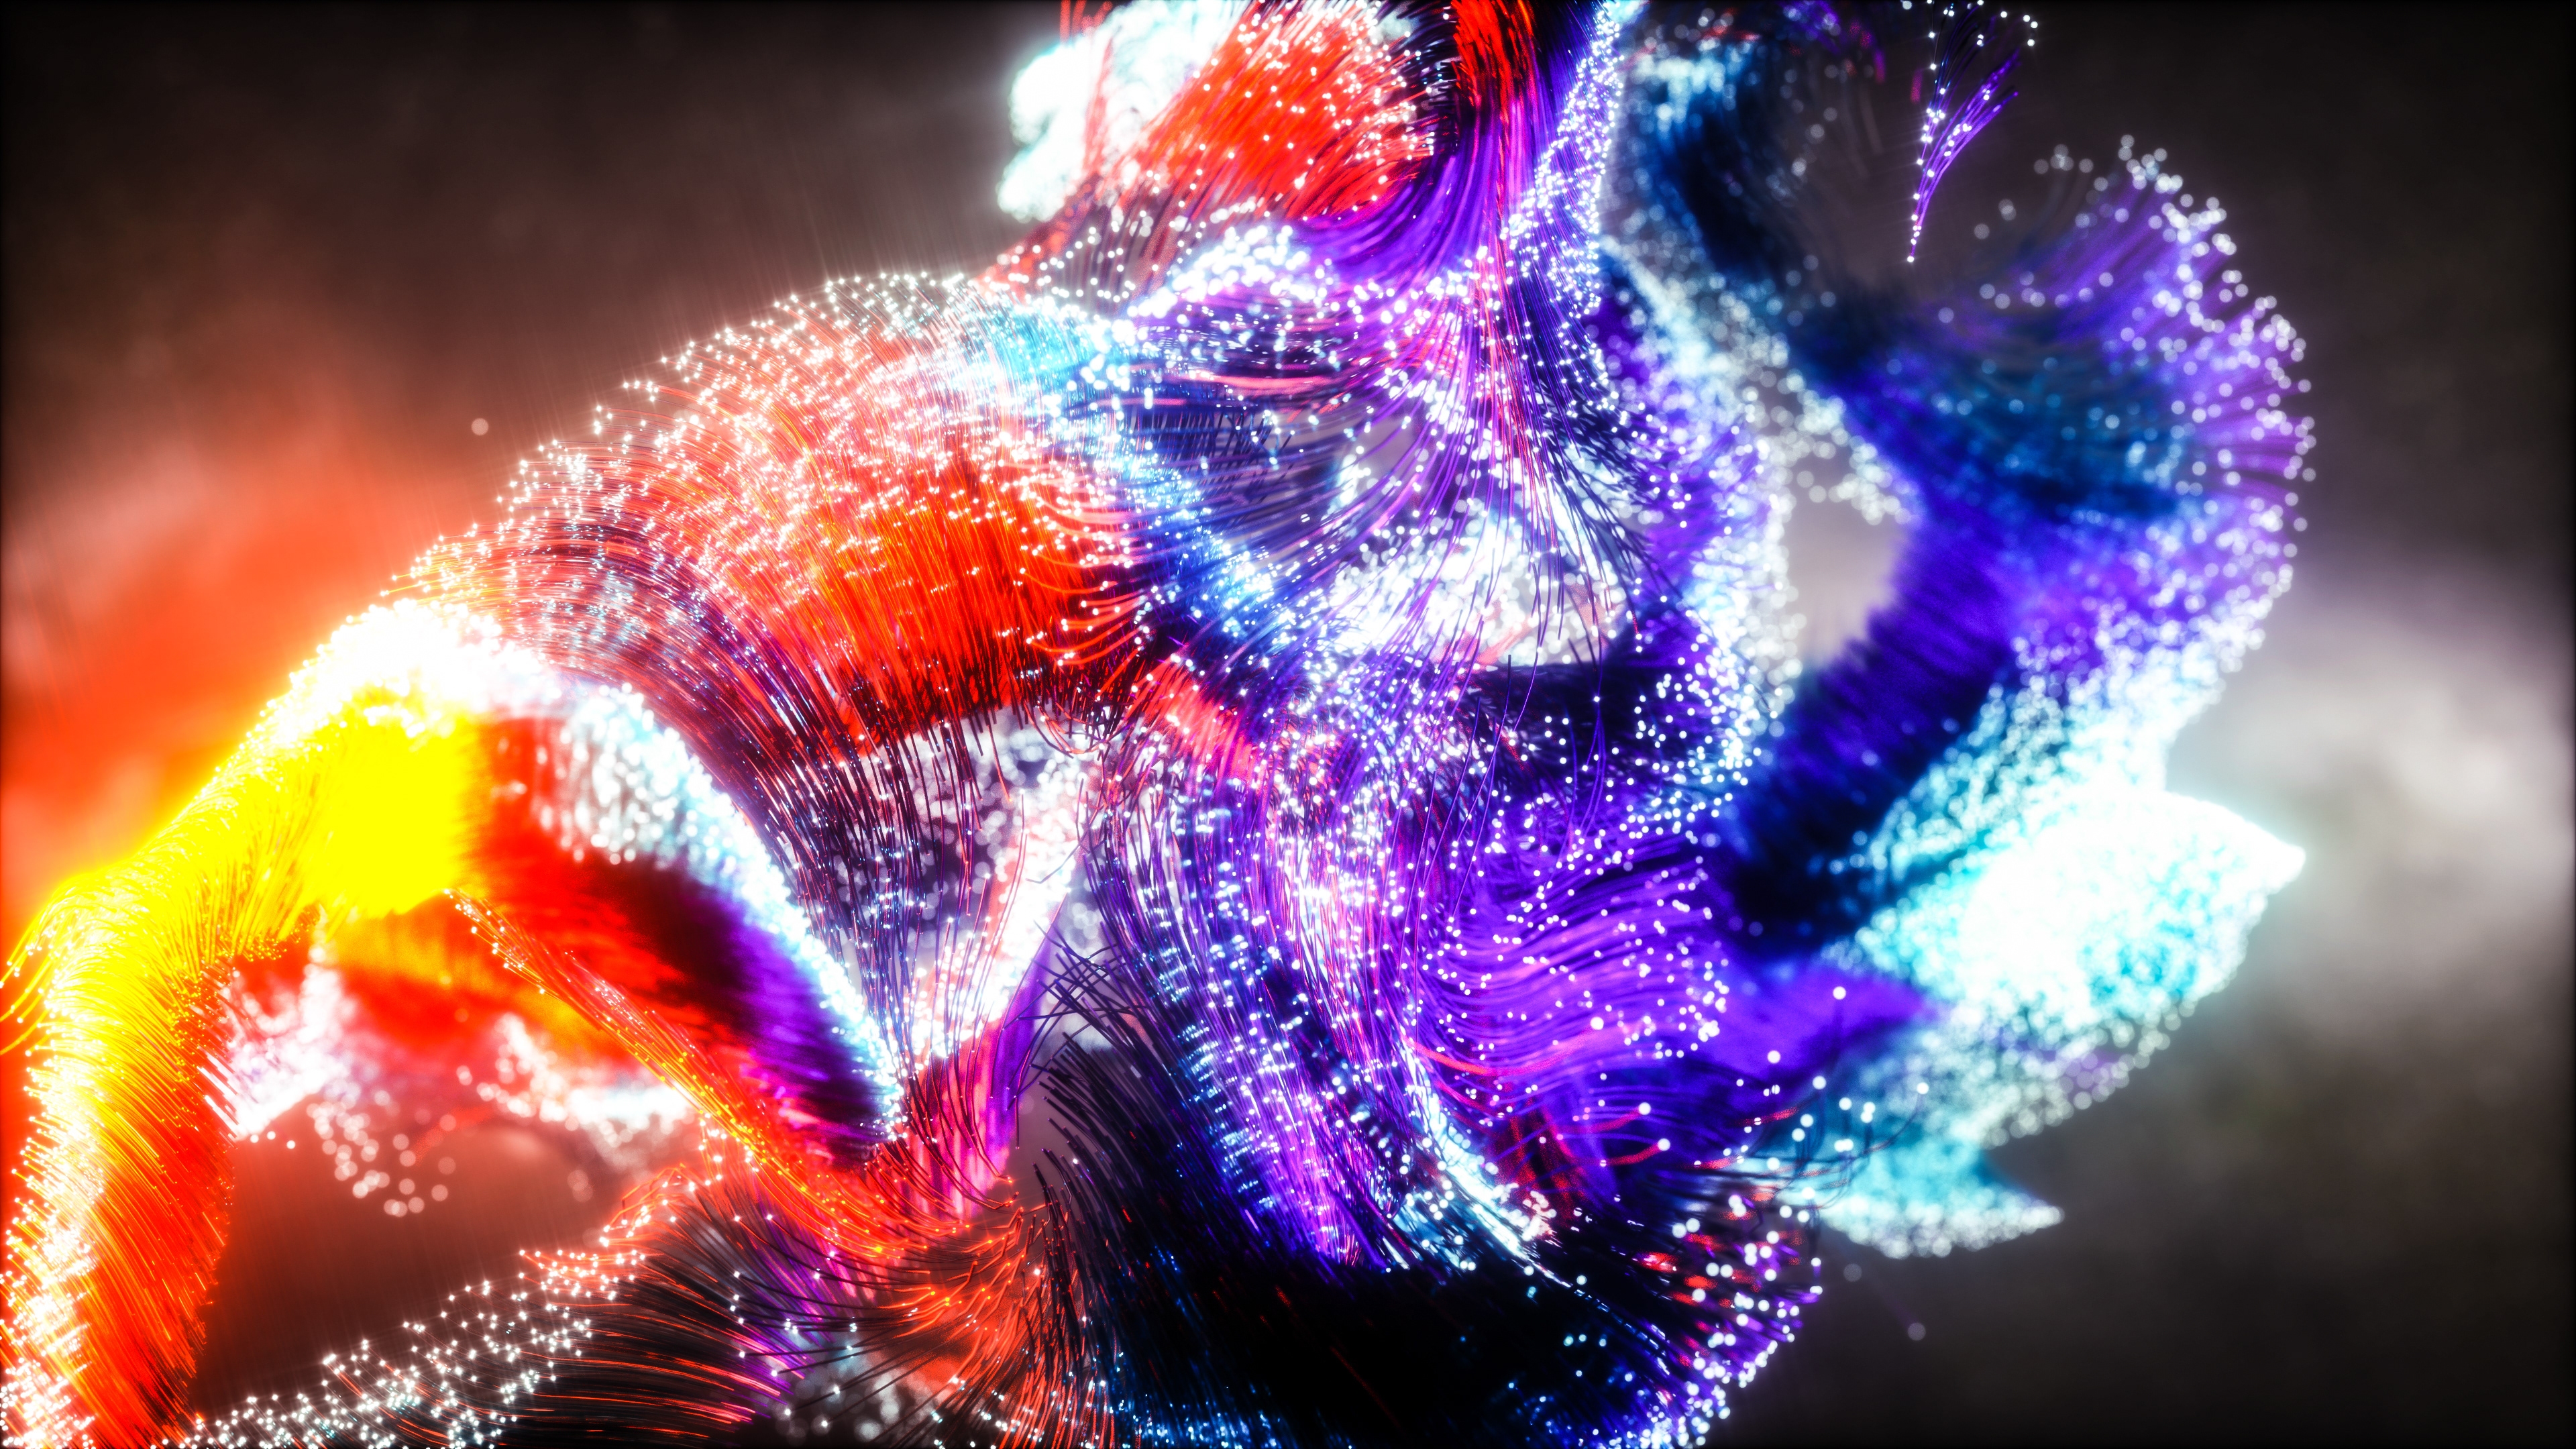 HD wallpaper, Glowing, 3D, Colorful, Particles, Psychedelic